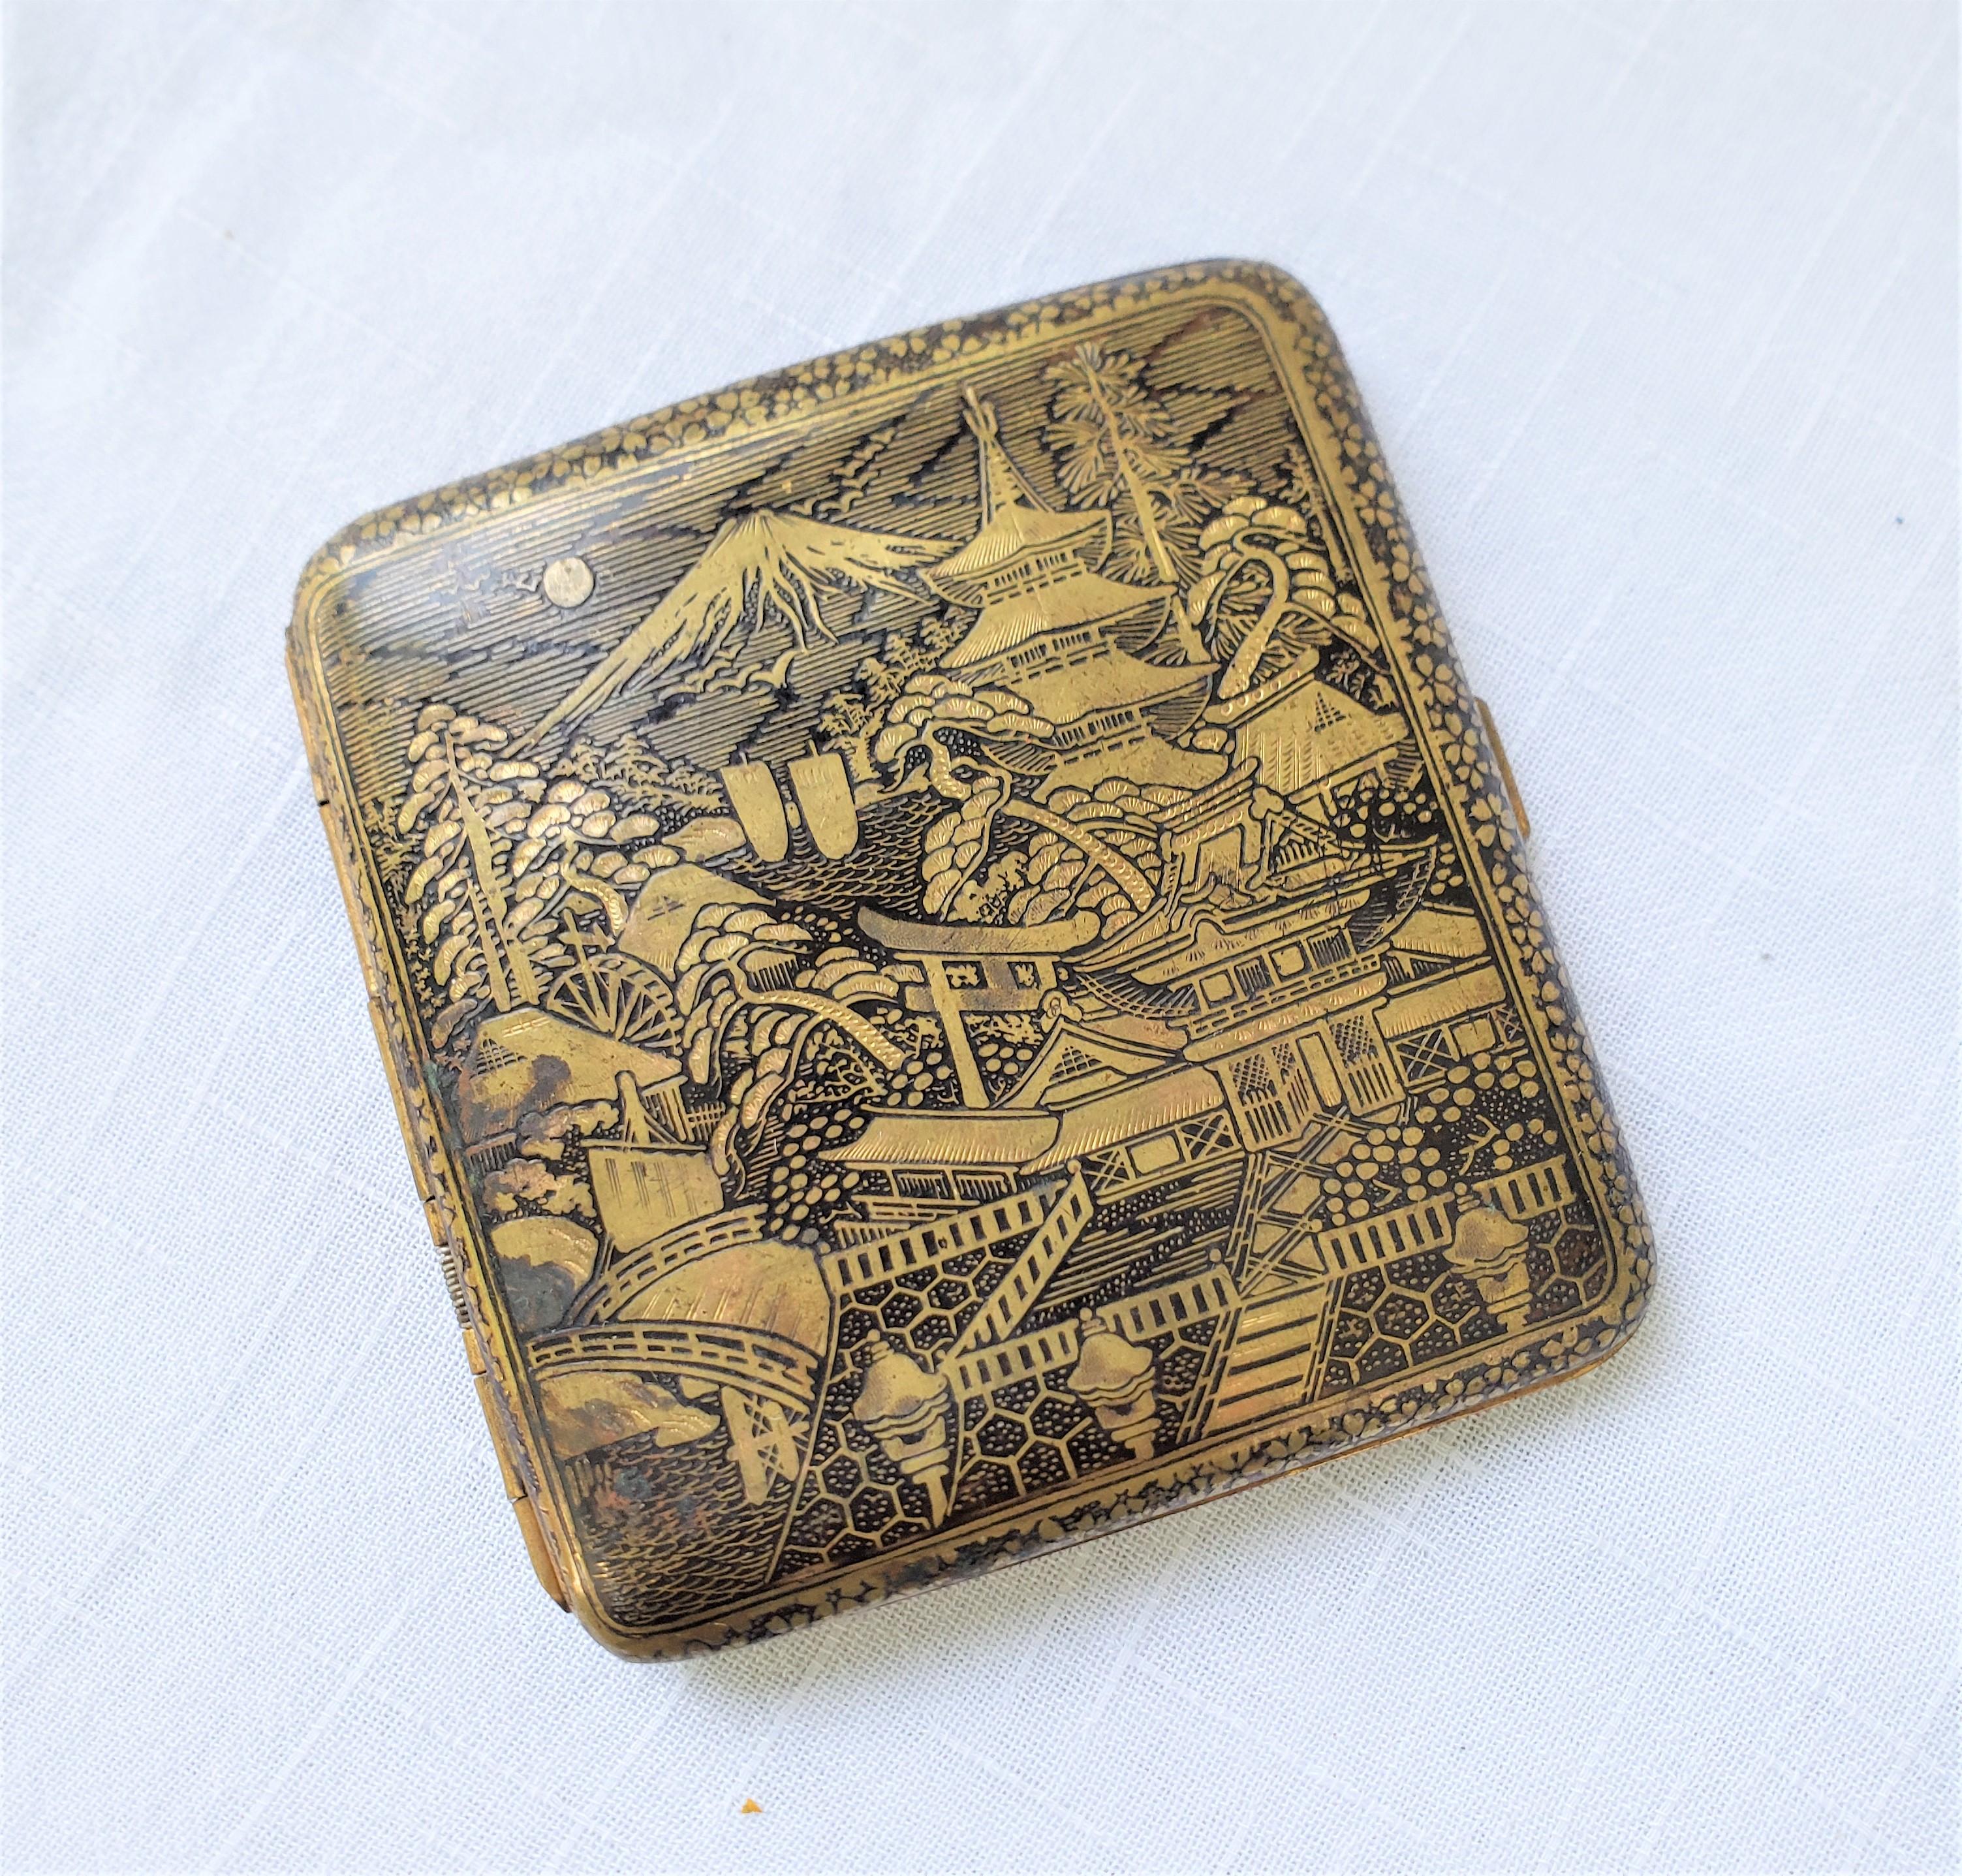 This antique cigarette case is unsigned by the maker, but presumed to have originated from Japan and date to approximately 1920 and done in the period Japanese Export style. The case is composed of metal with a hinged back and clasp and features